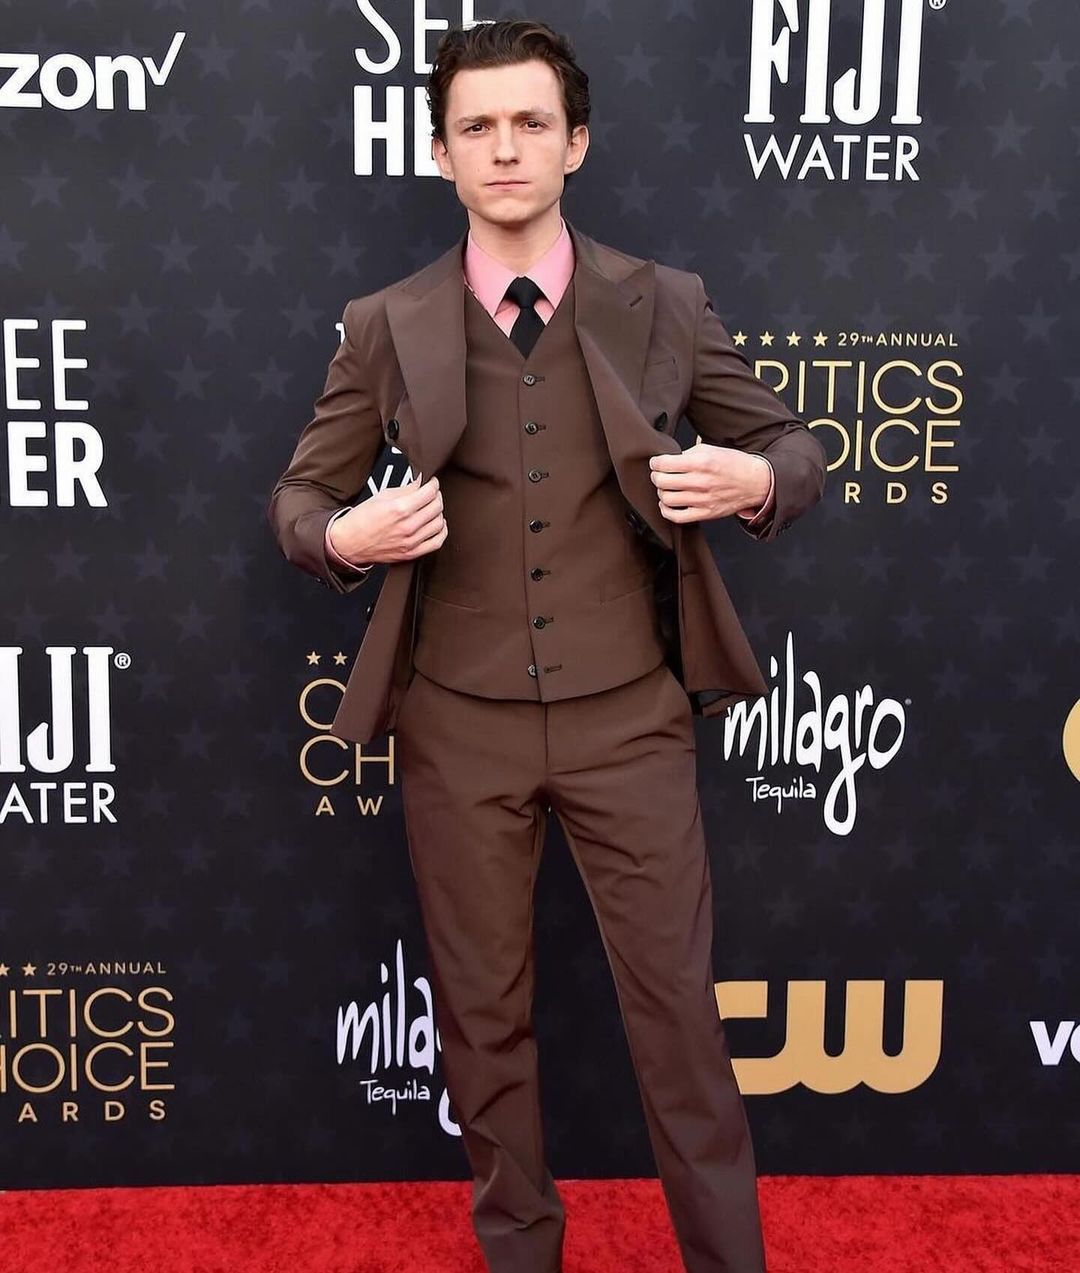 Tom Holland opted for a chocolate brown three-piece Prada suit that complemented his complexion and hair color. He paired it with a pink shirt, a black tie, and a pair of black Chelsea boots, creating a harmonious and elegant combination of hues and textures. He also wore a Cartier watch and ring, adding some sparkle to his wrist and finger.